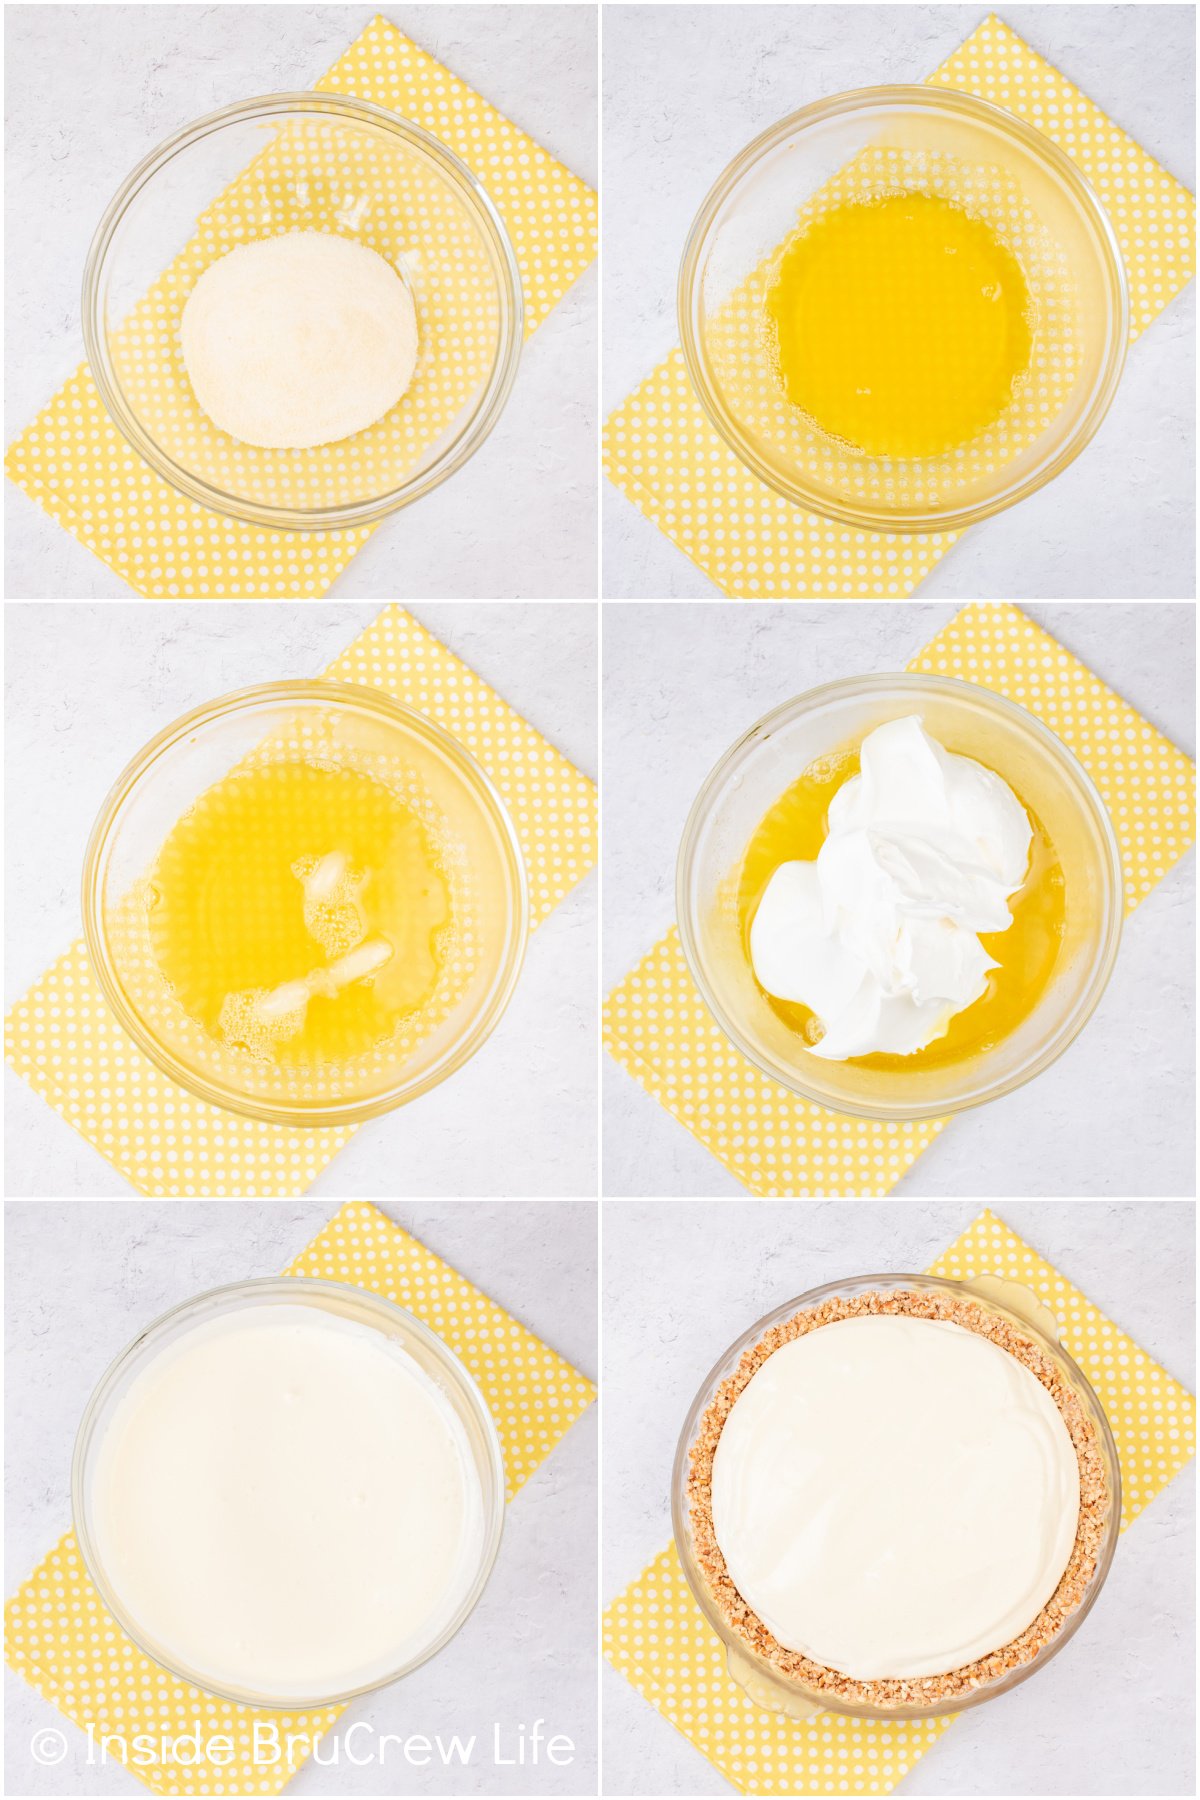 Six pictures collaged together showing how to make a Jello pie filling.